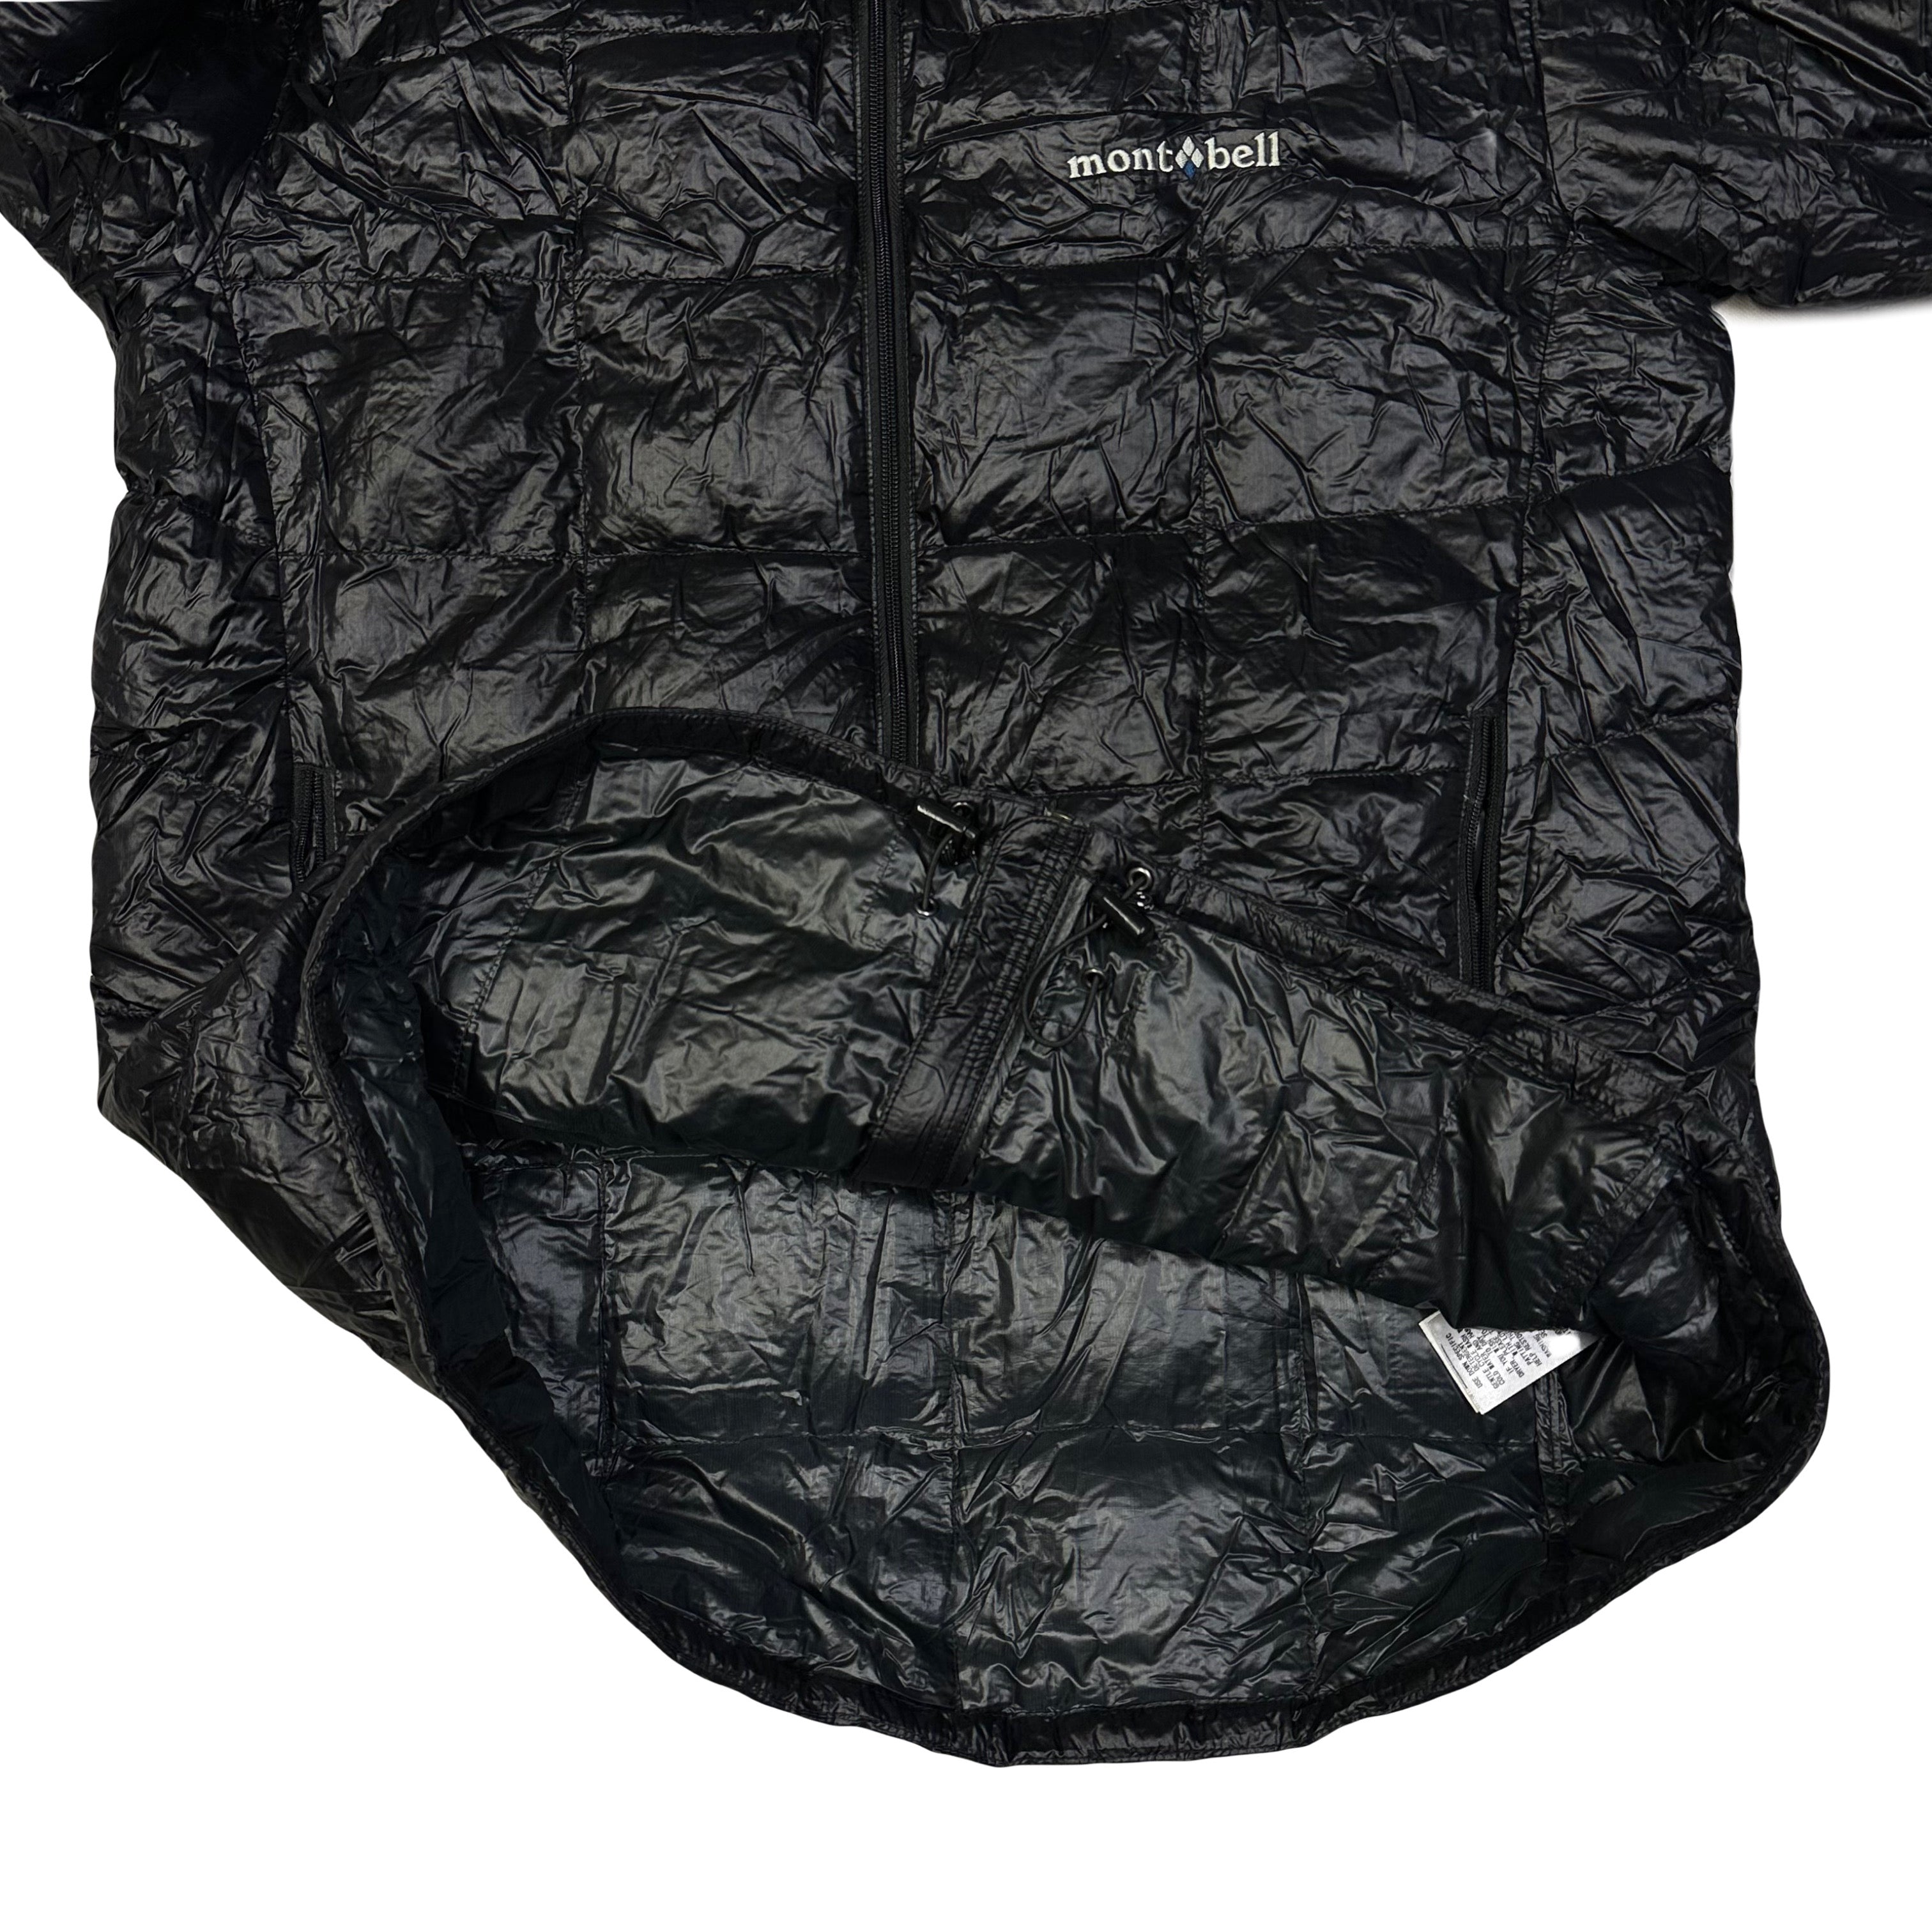 Montbell Square Stitch Down Puffer Jacket In Black ( M )